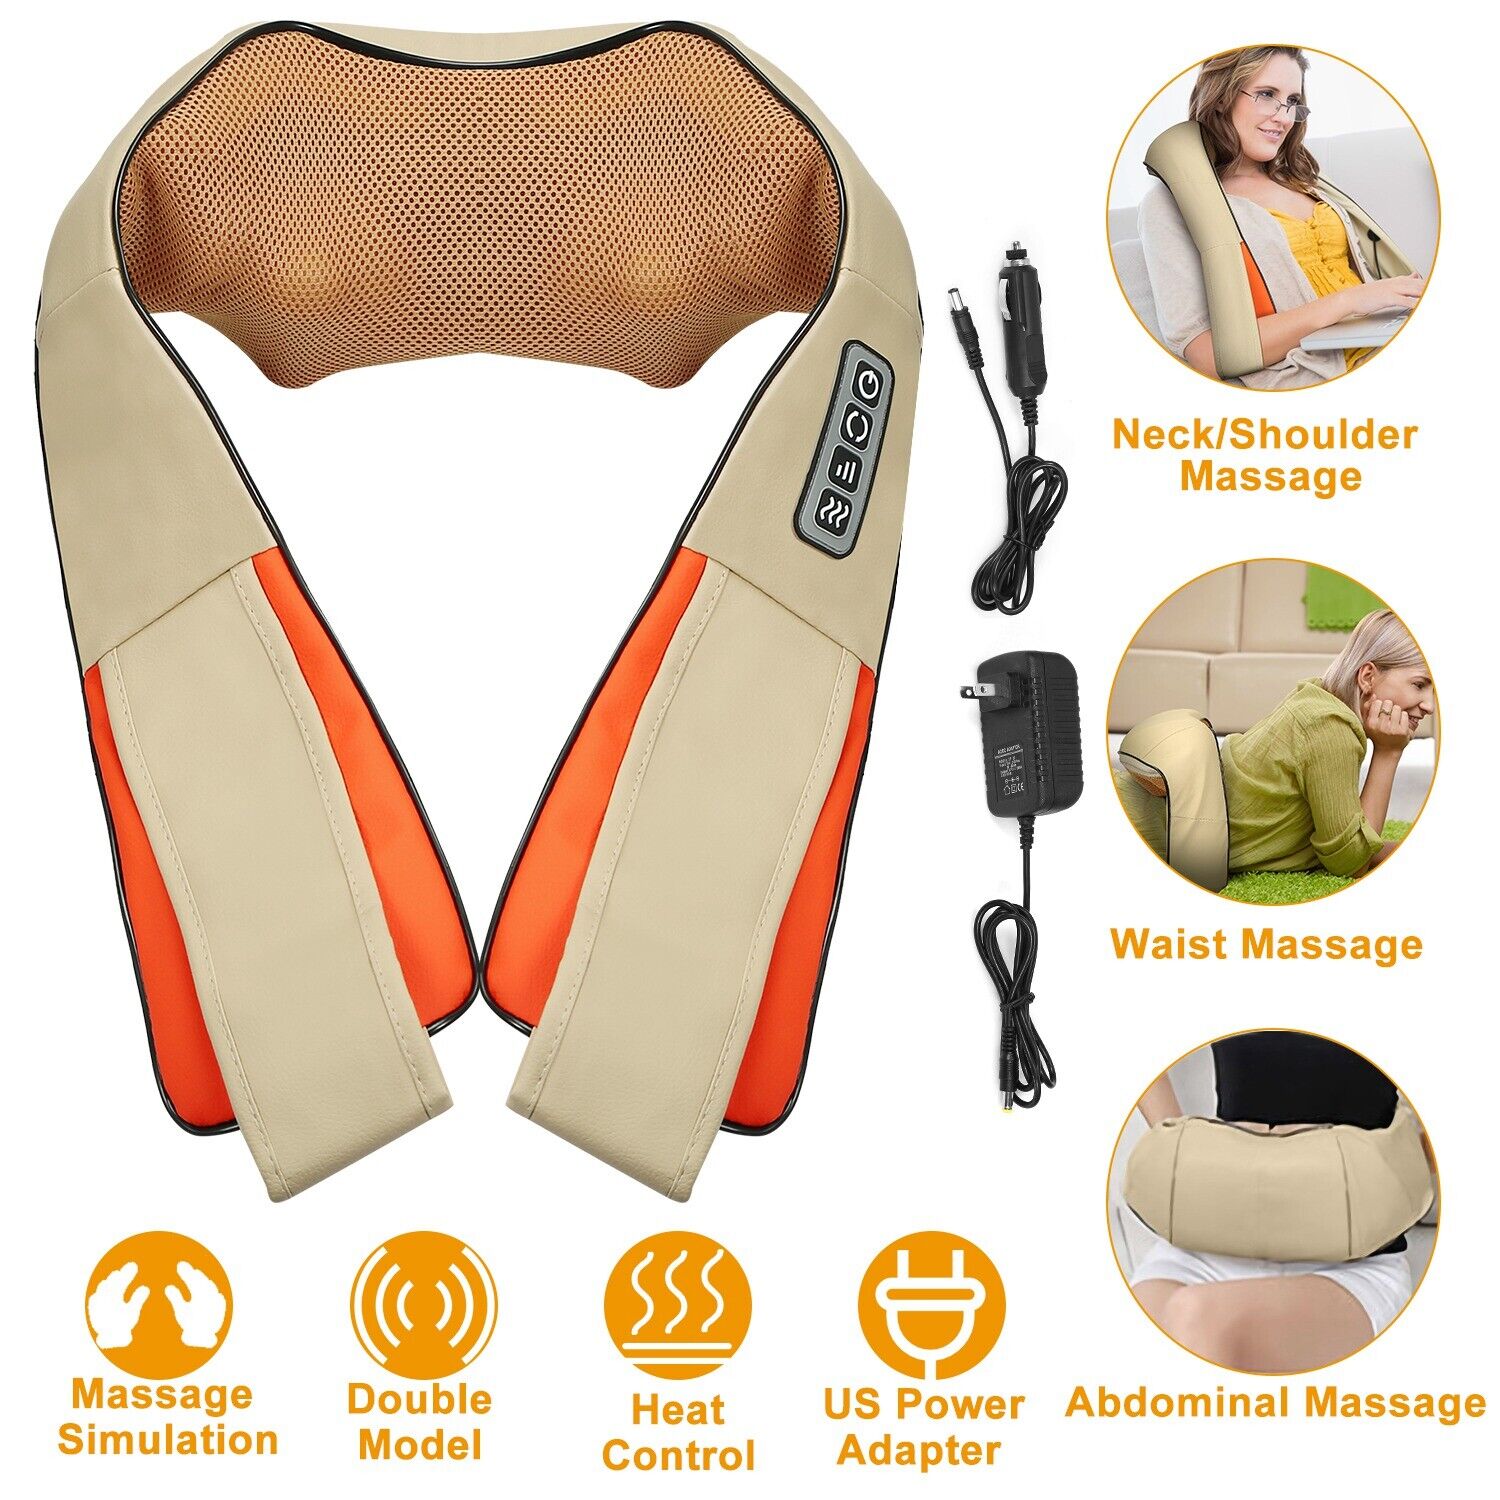 Neck and Shoulder Massager Electric Shiatsu Back Massage w/ Heating Gift for All | eBay